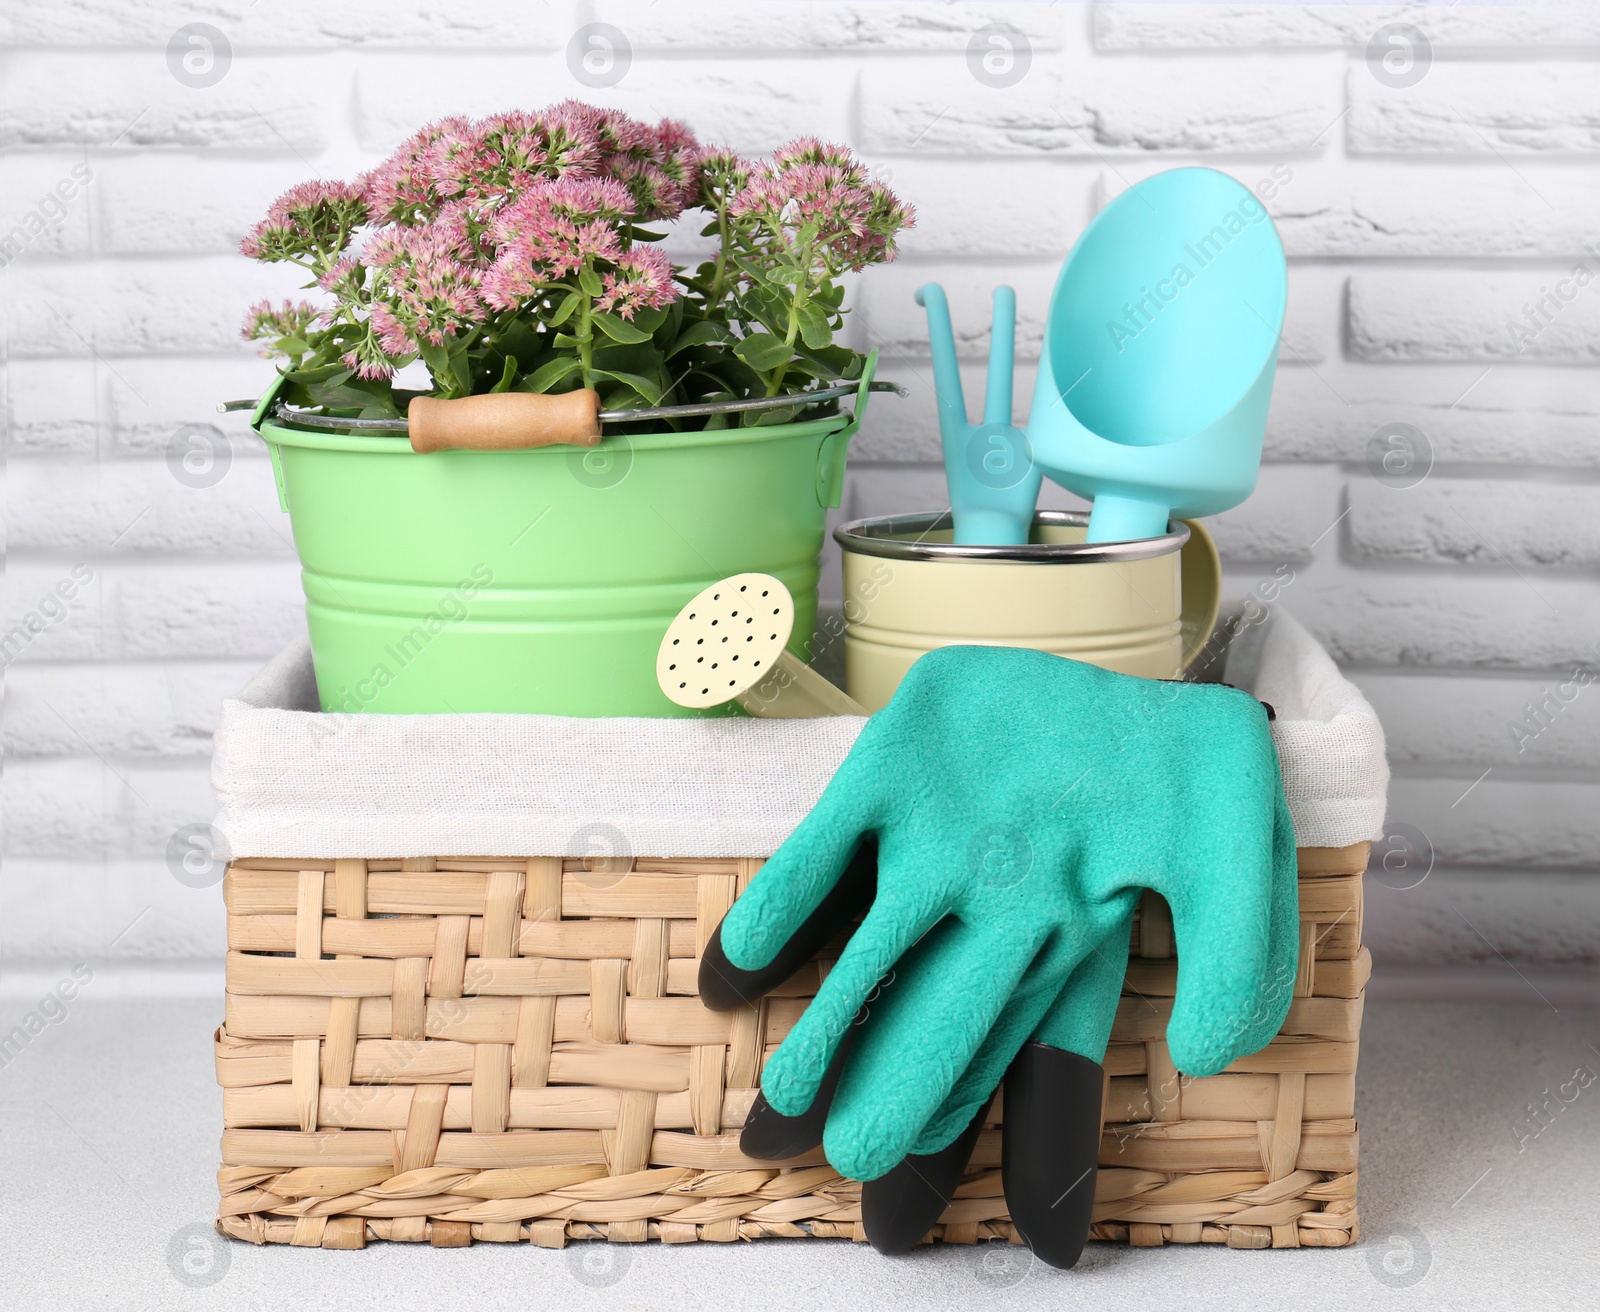 Photo of Basket with watering can, gardening tools and beautiful plant on table near white brick wall